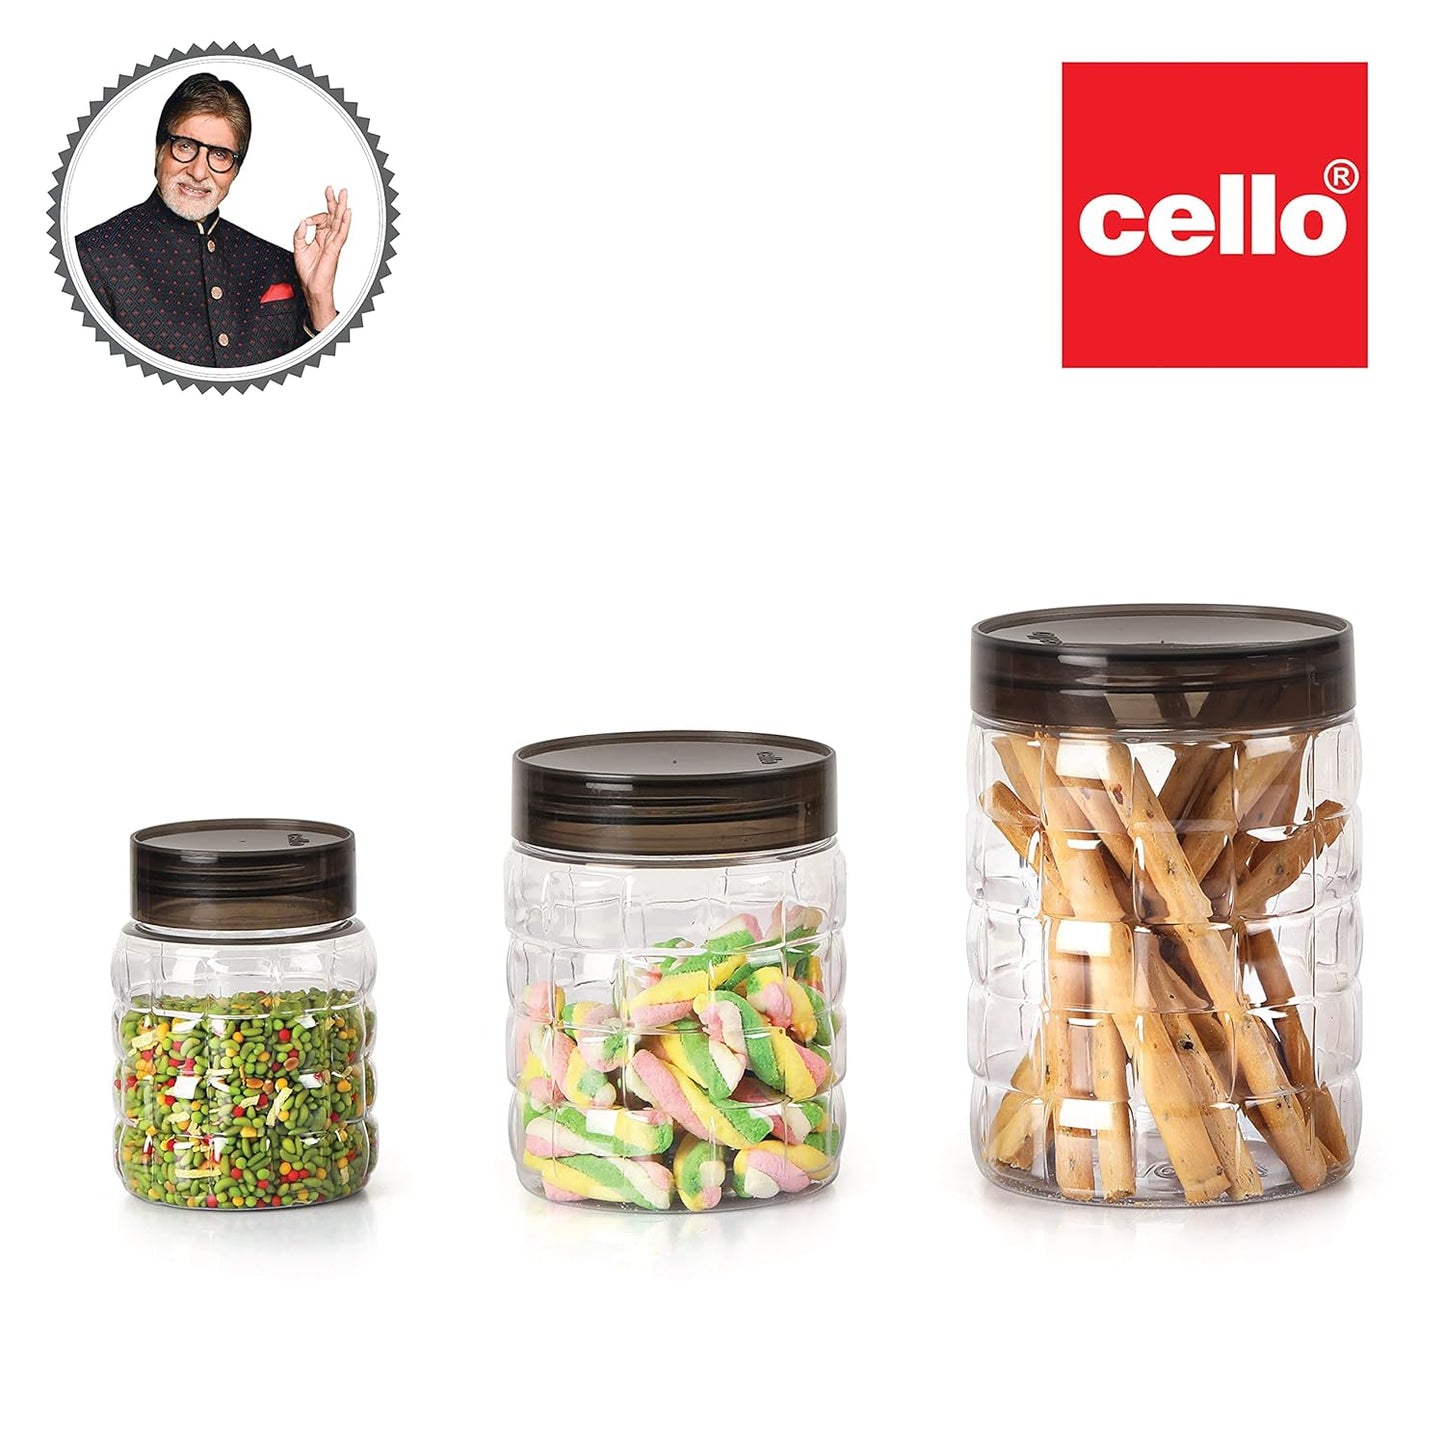 CELLO Checkers Pet Plastic Airtight Canister Set | Food grade and BPA free canisters | Air tight seal & Stackable Transparent | 300ml x 6, 650ml x 6, 1200 x 6, Set of 18